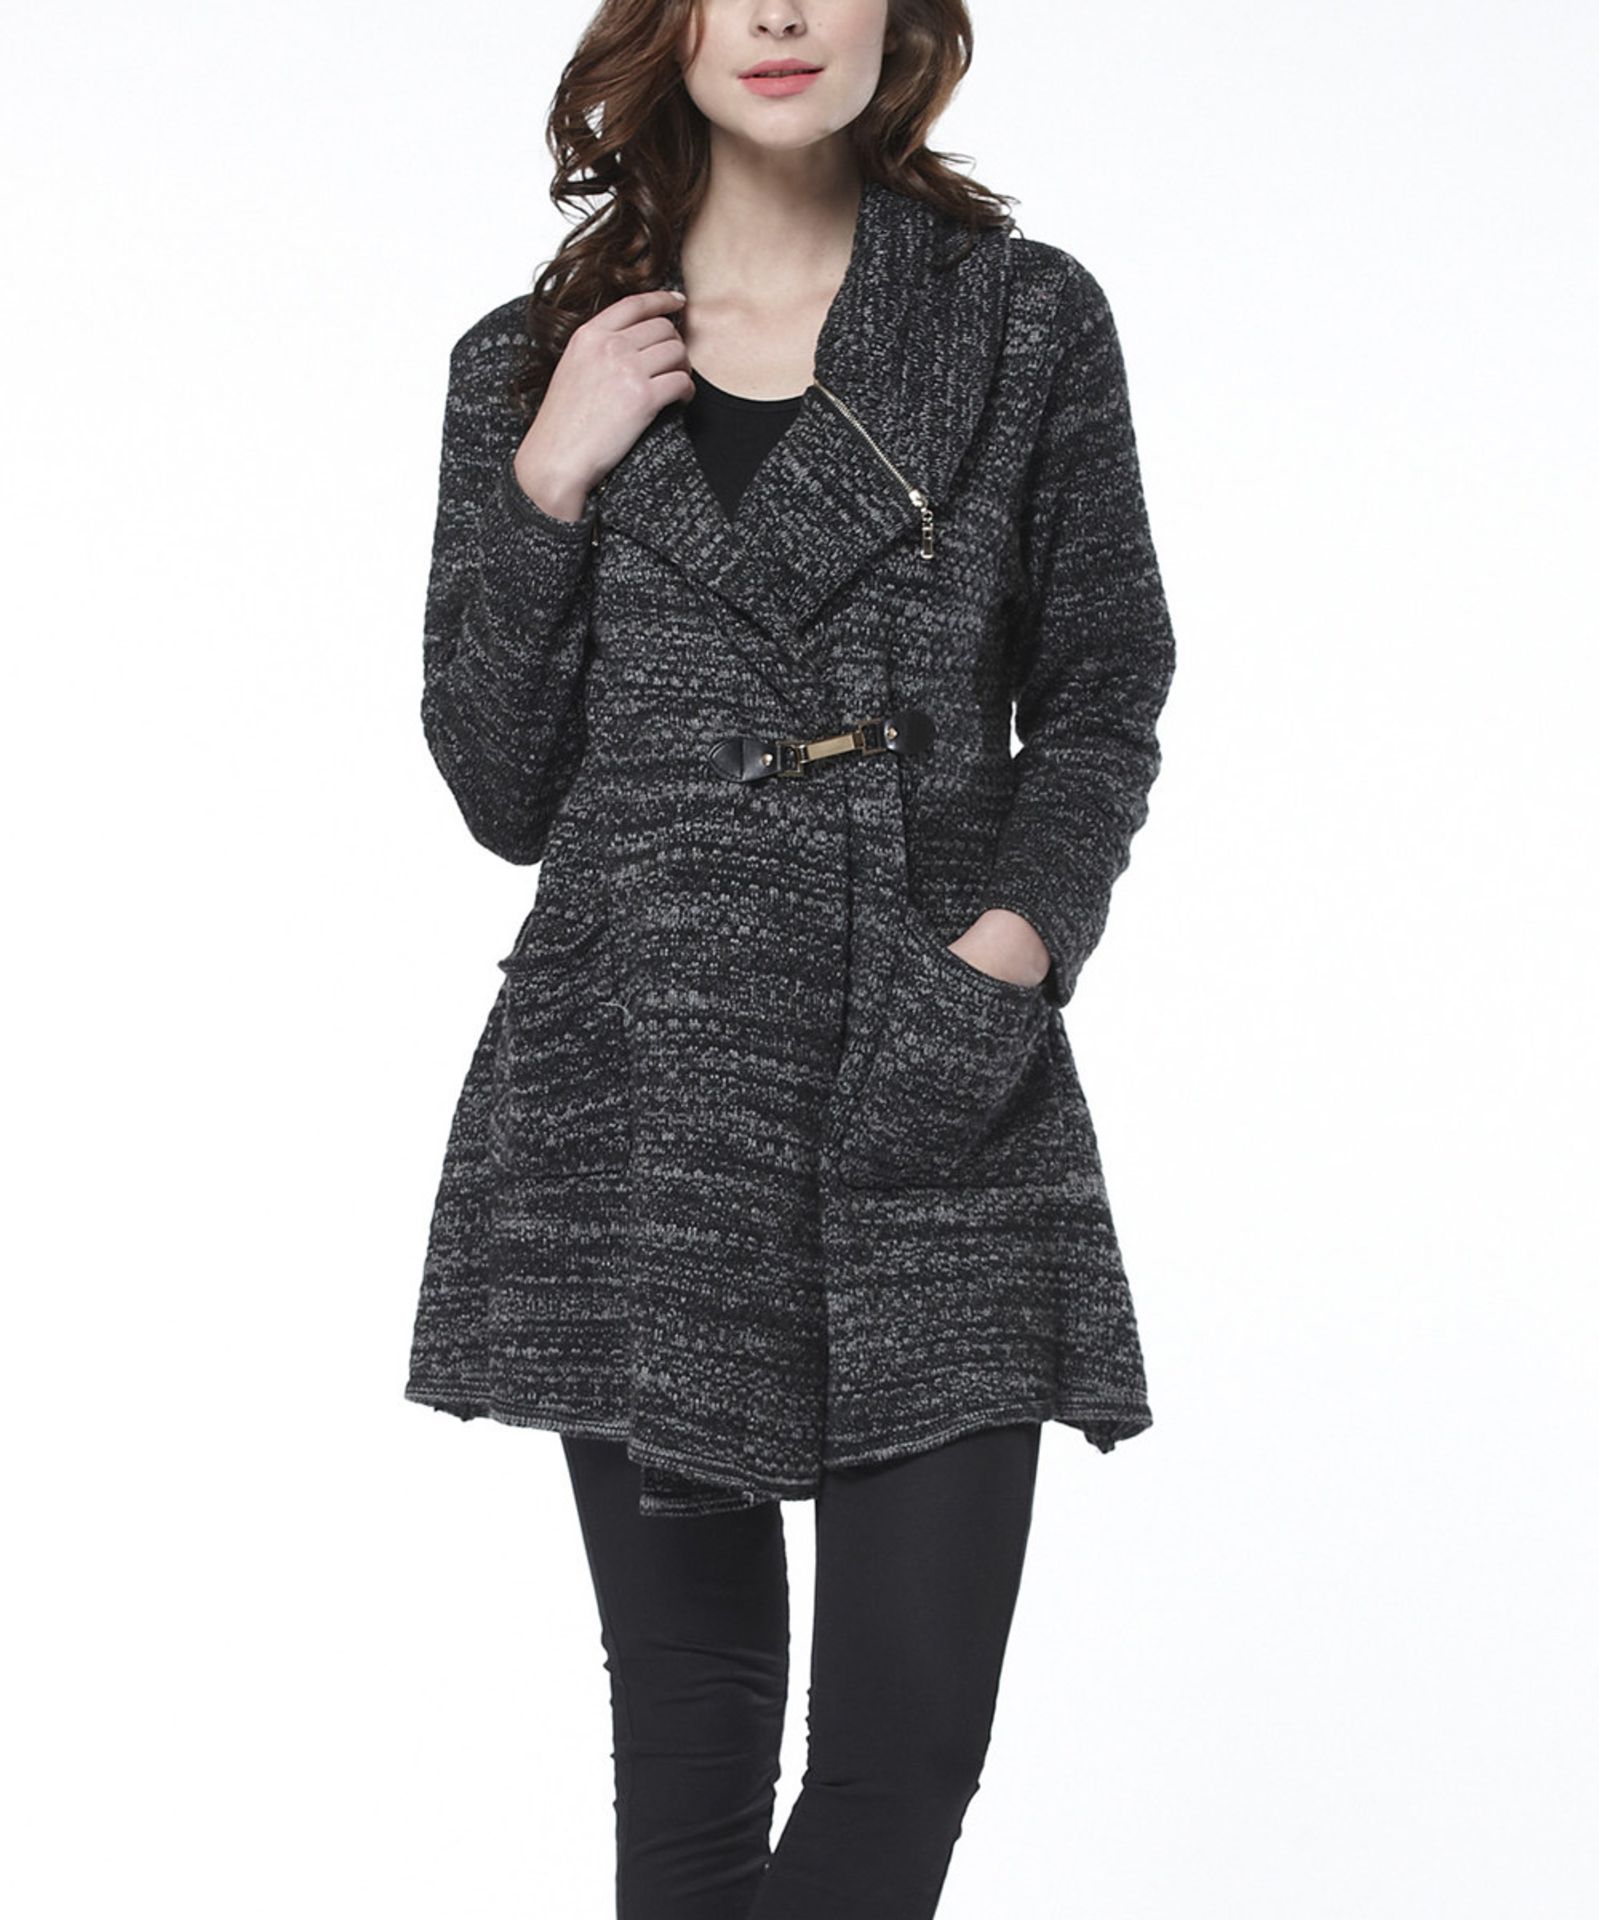 Simply Couture Black Wool-Blend Belted Cardigan (Us Size: M) [Ref: 29623998] - Image 2 of 3